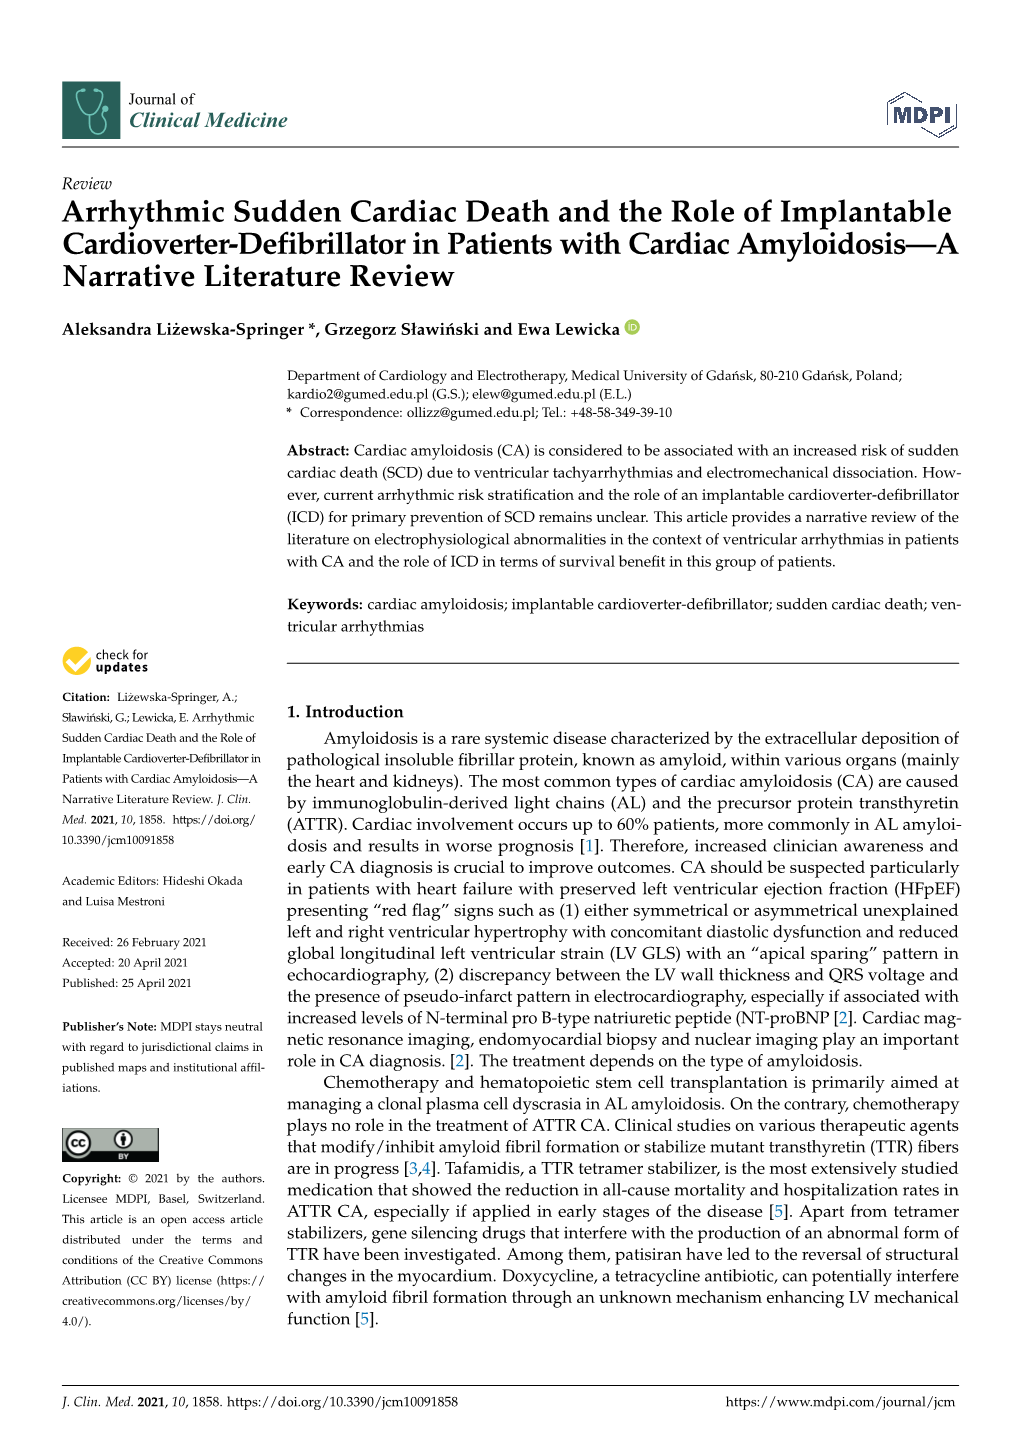 Arrhythmic Sudden Cardiac Death and the Role of Implantable Cardioverter-Defibrillator in Patients with Cardiac Amyloidosis—A Narrative Literature Review